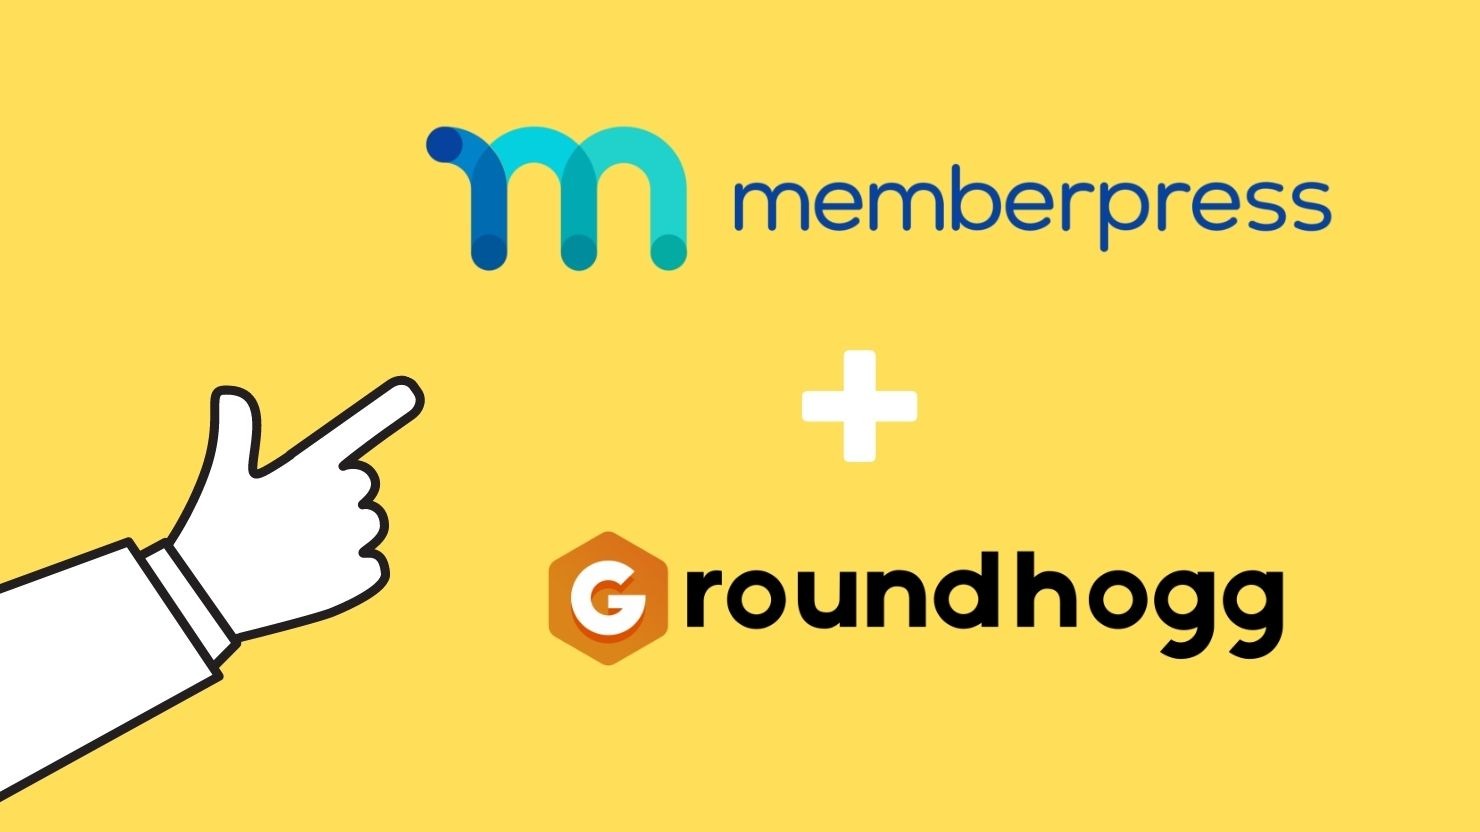 Use MemberPress with Groundhogg for marketing